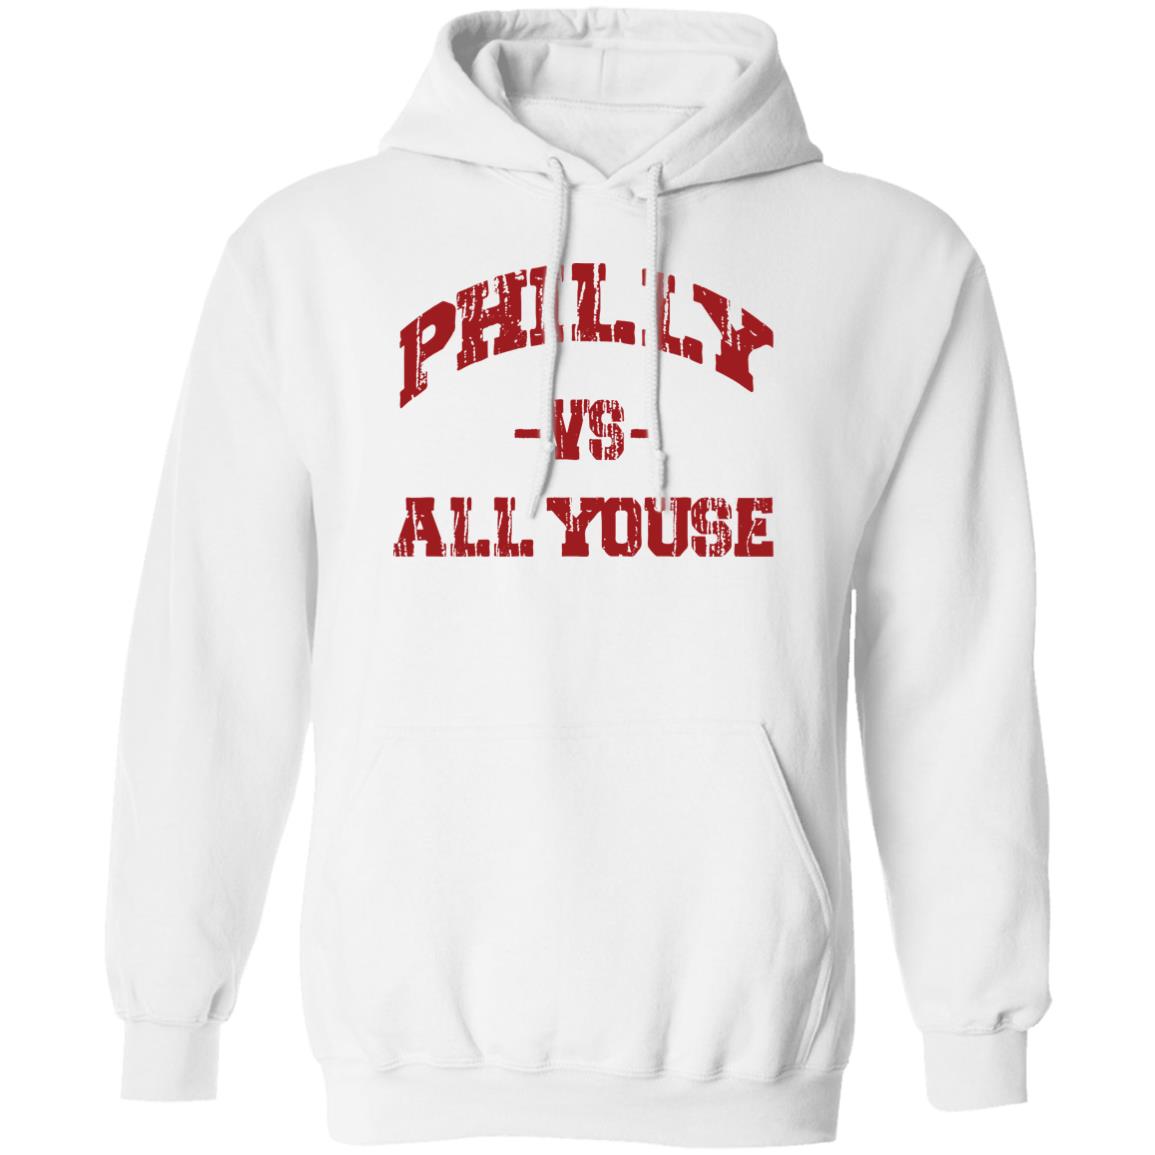 Philly Vs All Youse Shirt 1